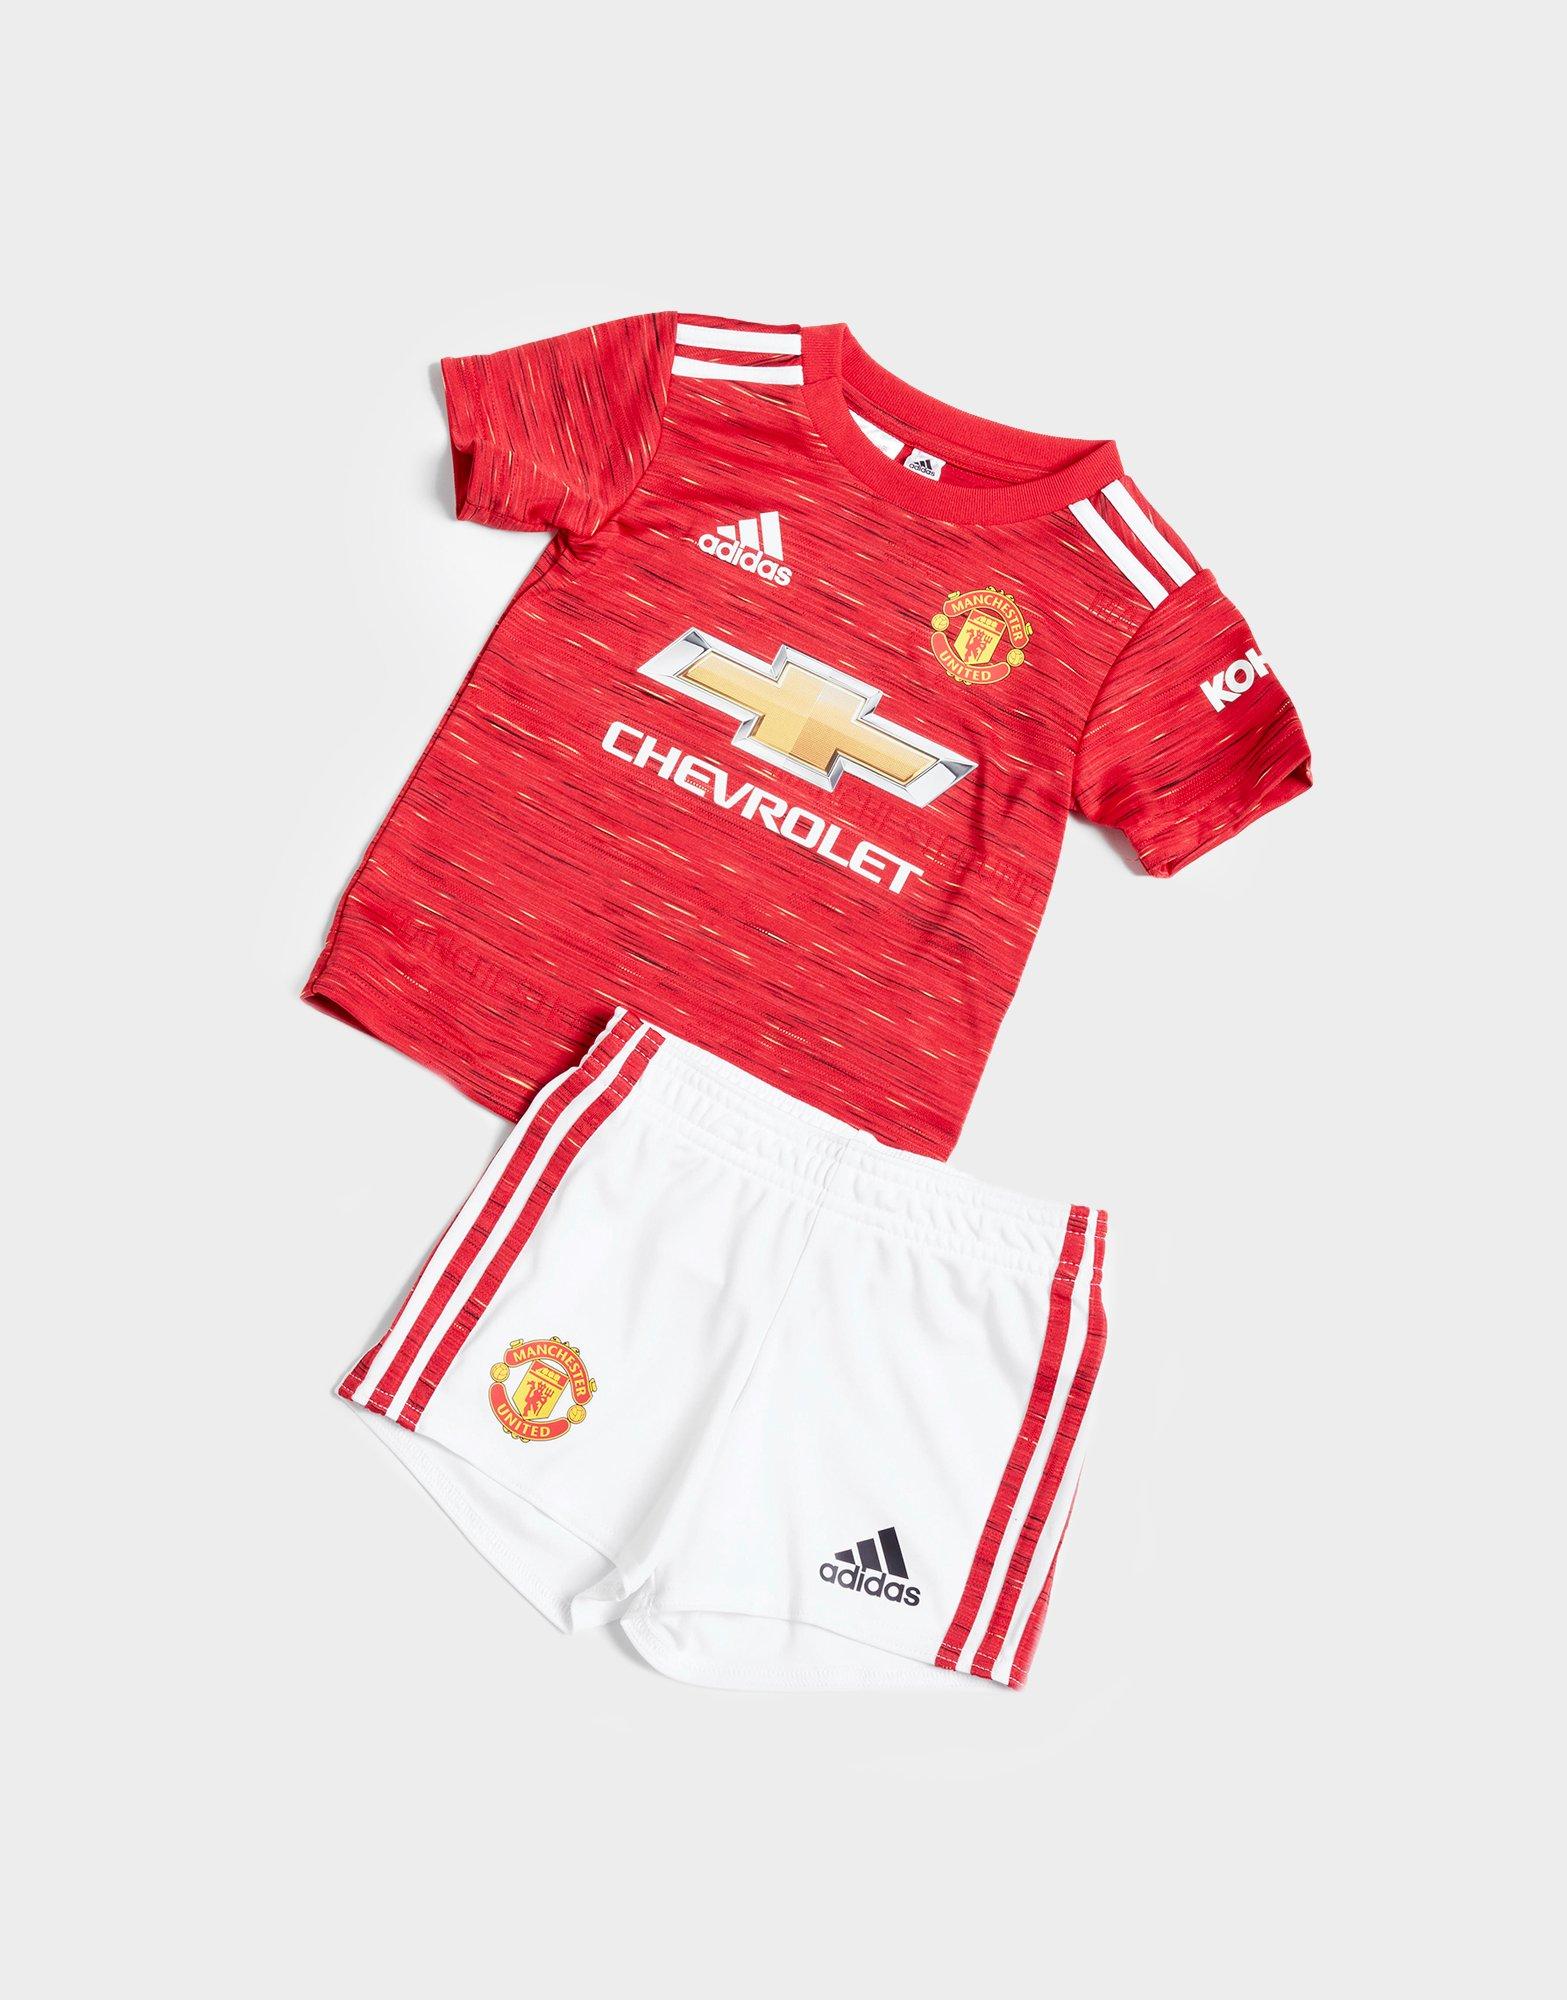 manchester united infant jersey